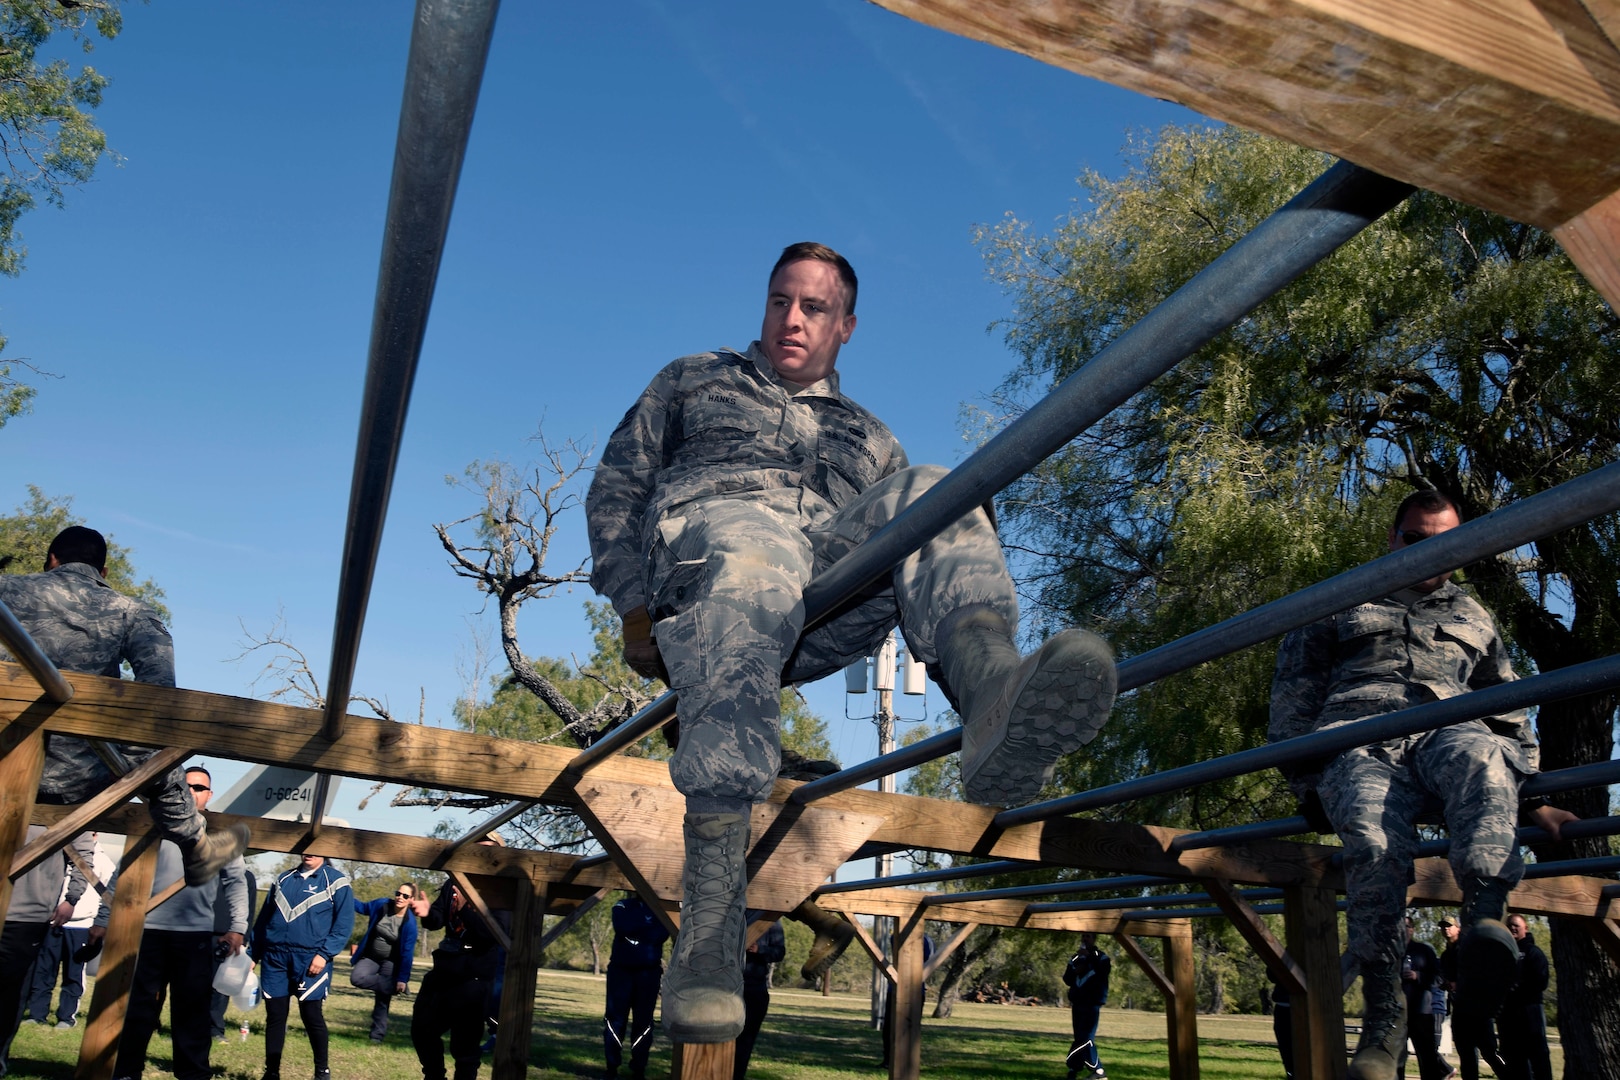 Staff Sgt. Bradley A. Hanks, 433rd Security Forces Squadron, crawls across an obstacle during a team-building exercise at the 433rd AW Resilience Tactical Pause at the Air Force Basic Military Training’s Basic Expeditionary Airman Skills Training site at the Medina Annex, Joint Base San Antonio-Lackland, Texas Nov. 3, 2019.